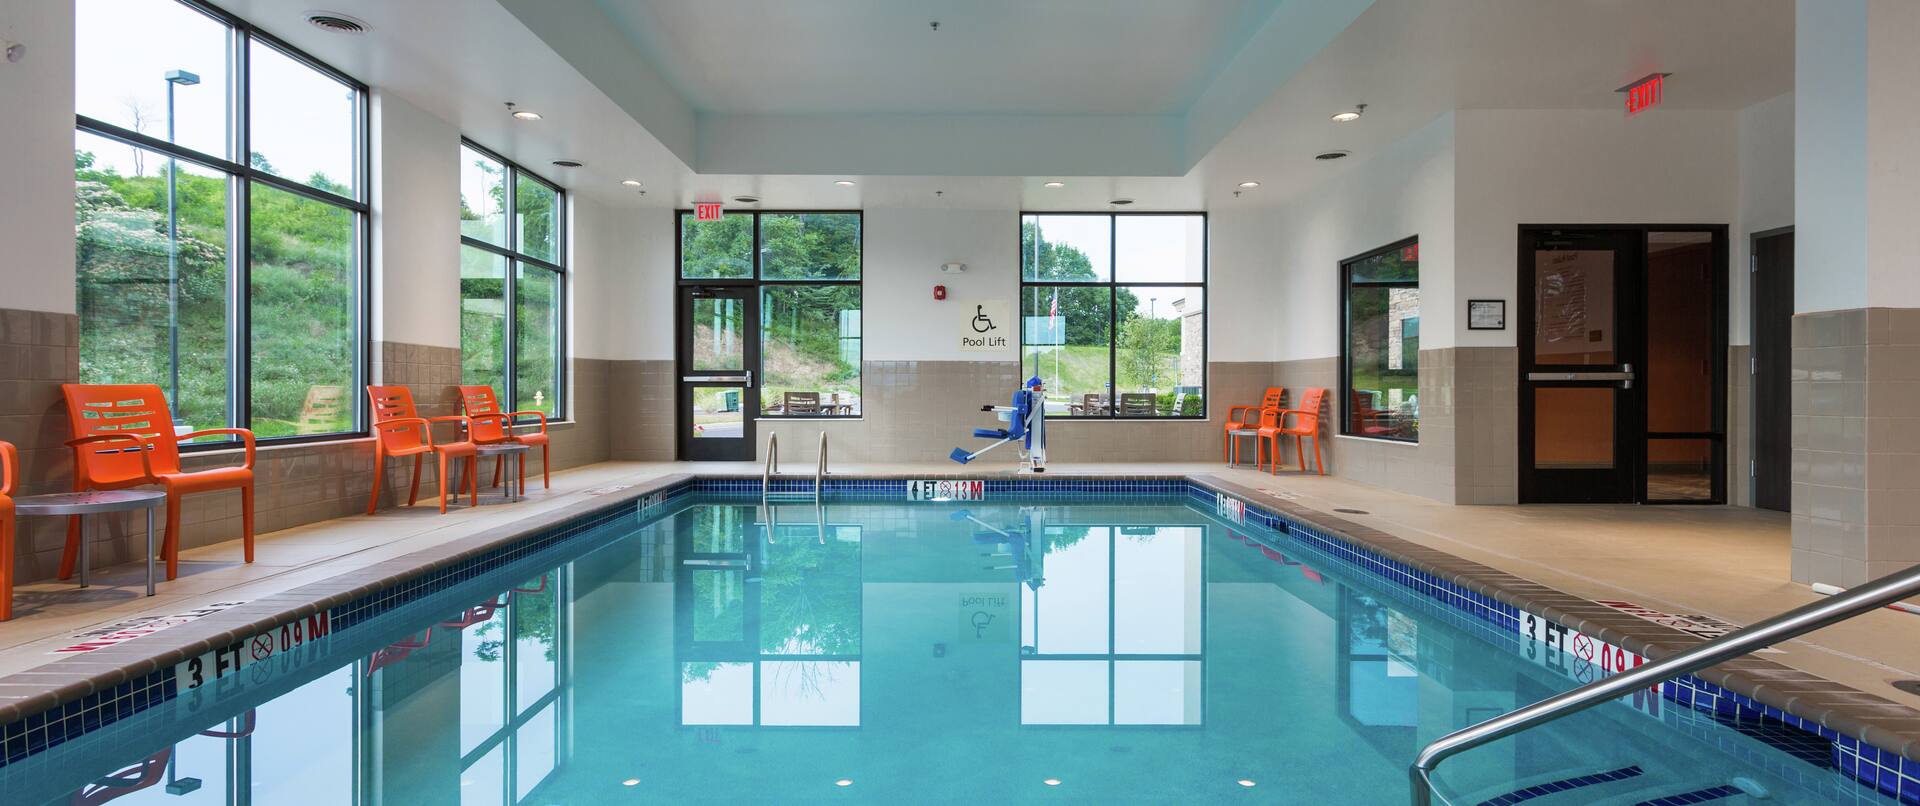 Indoor pool with chairs